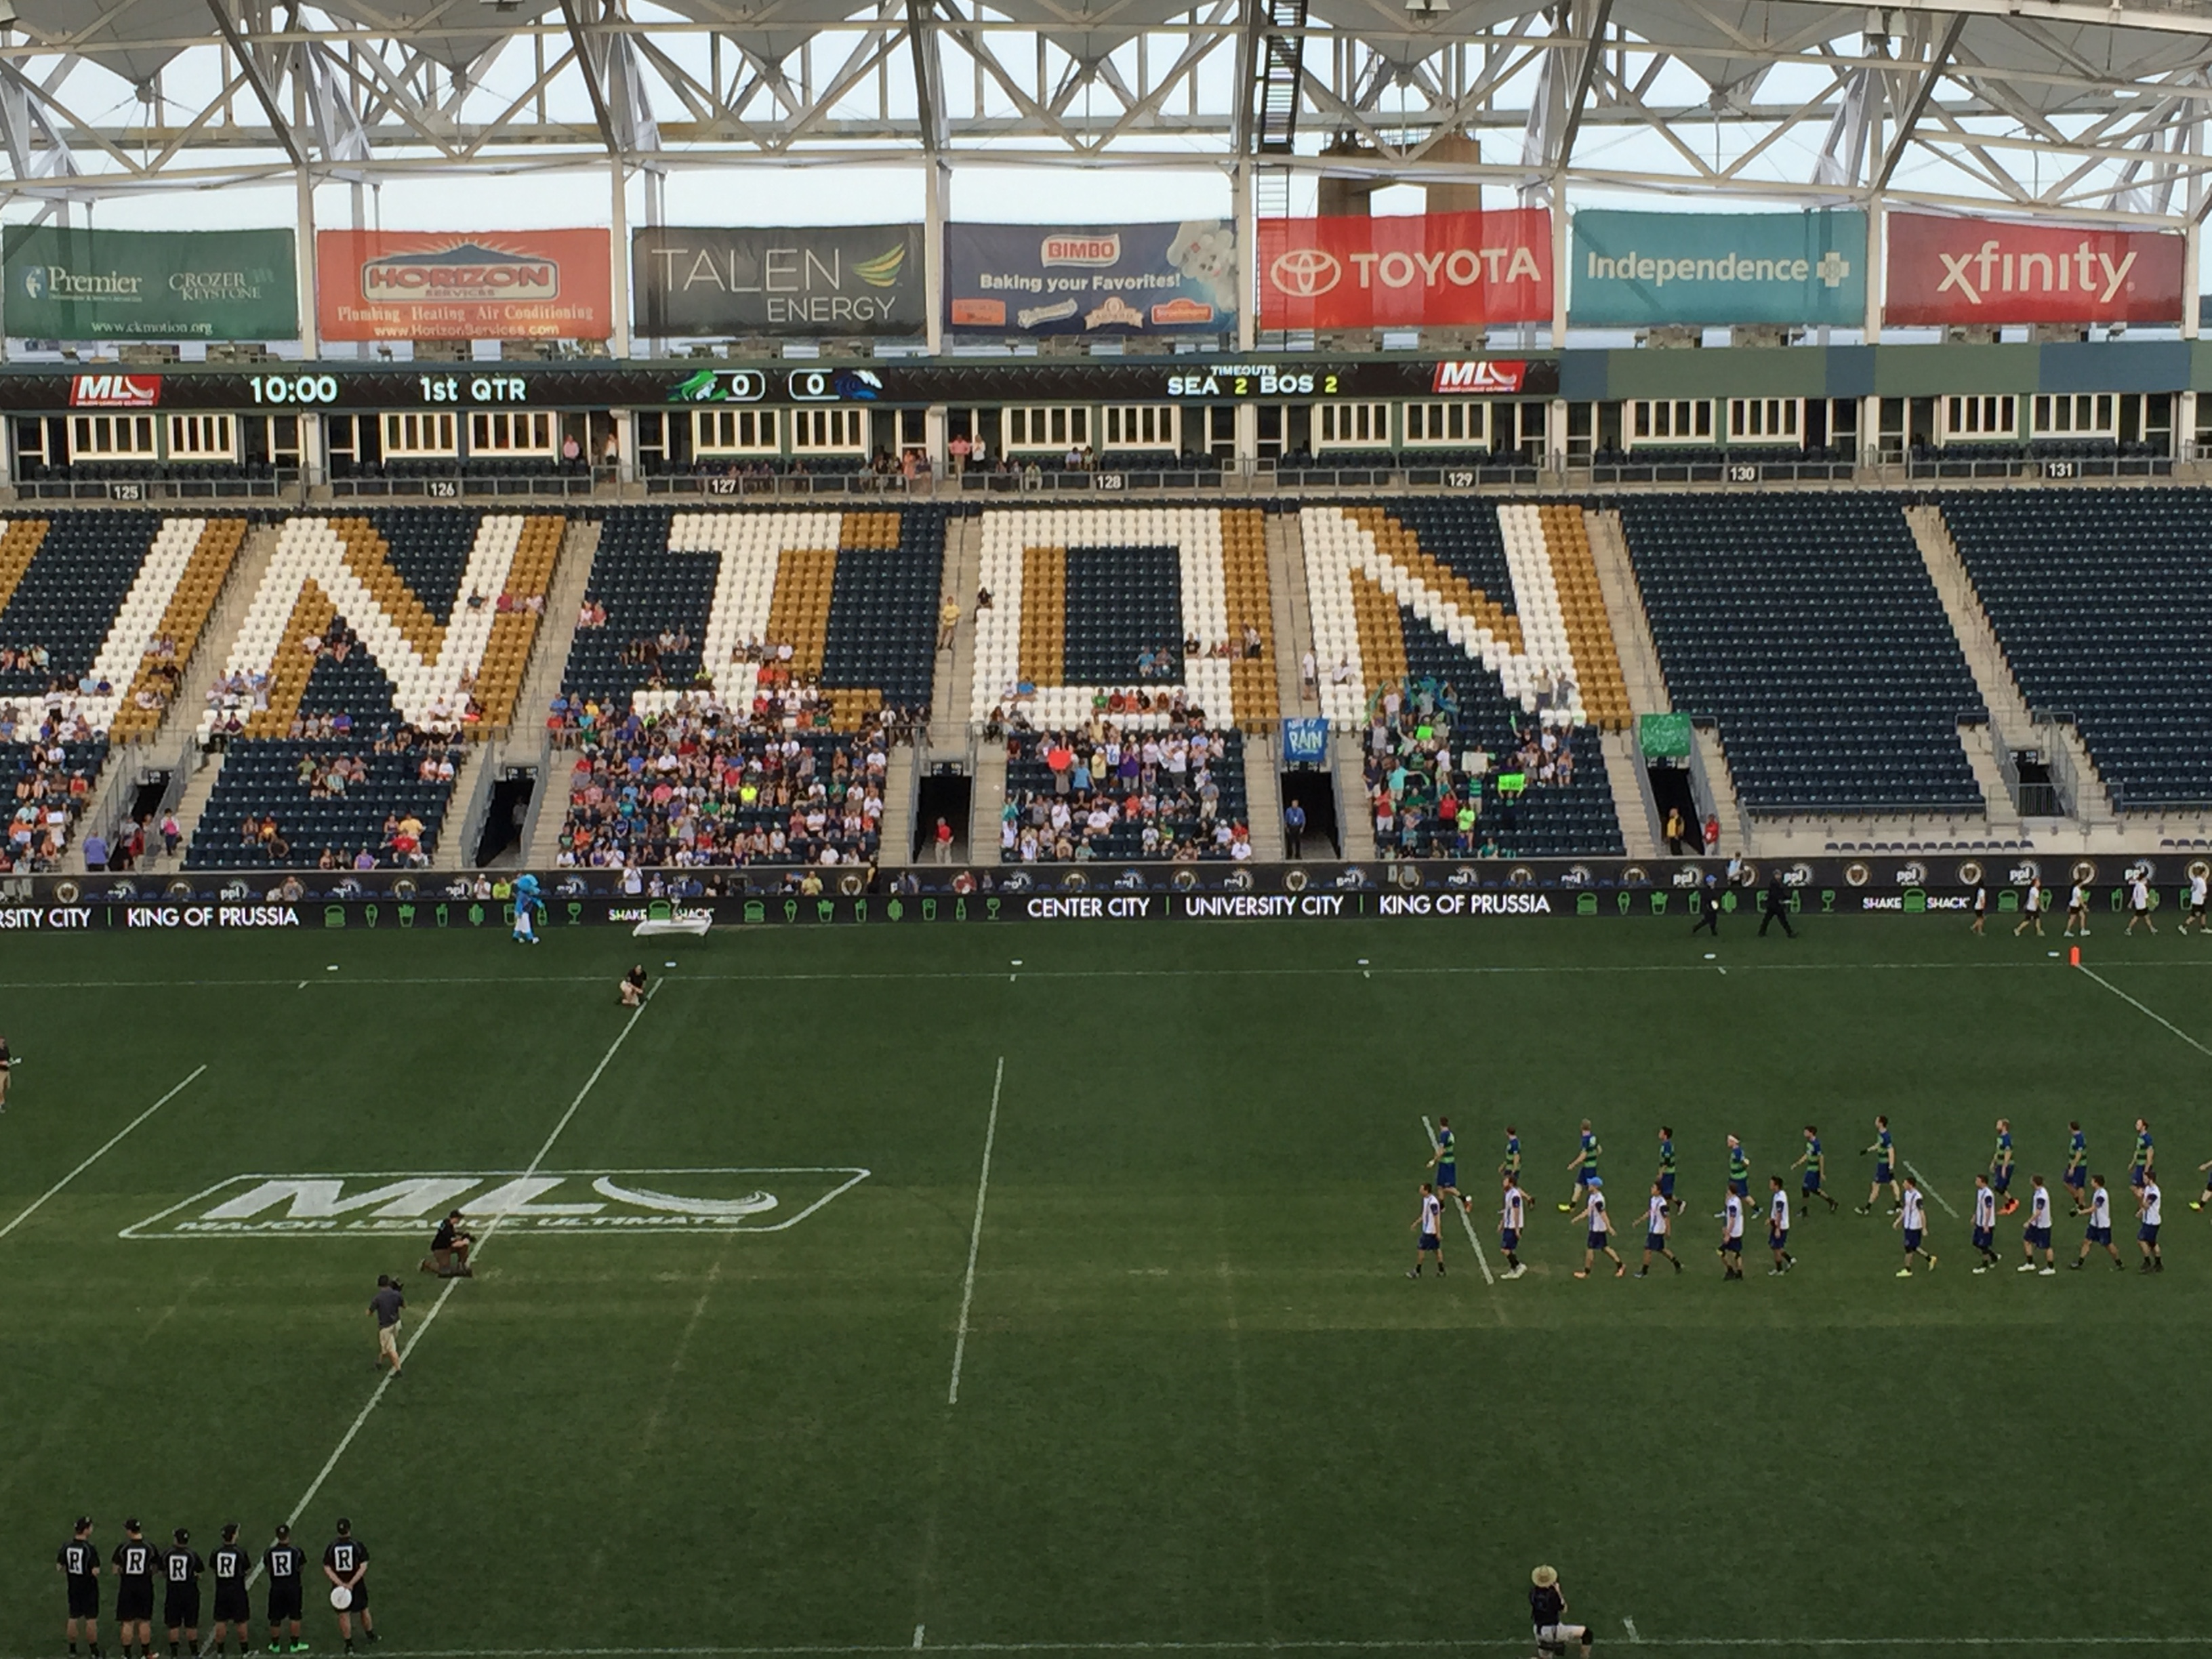 Boston Whitecaps & Seattle Rainmakers take the field before the National Ultimate Frisbee championships at PPL Park. (Credit: Kristen Johanson)